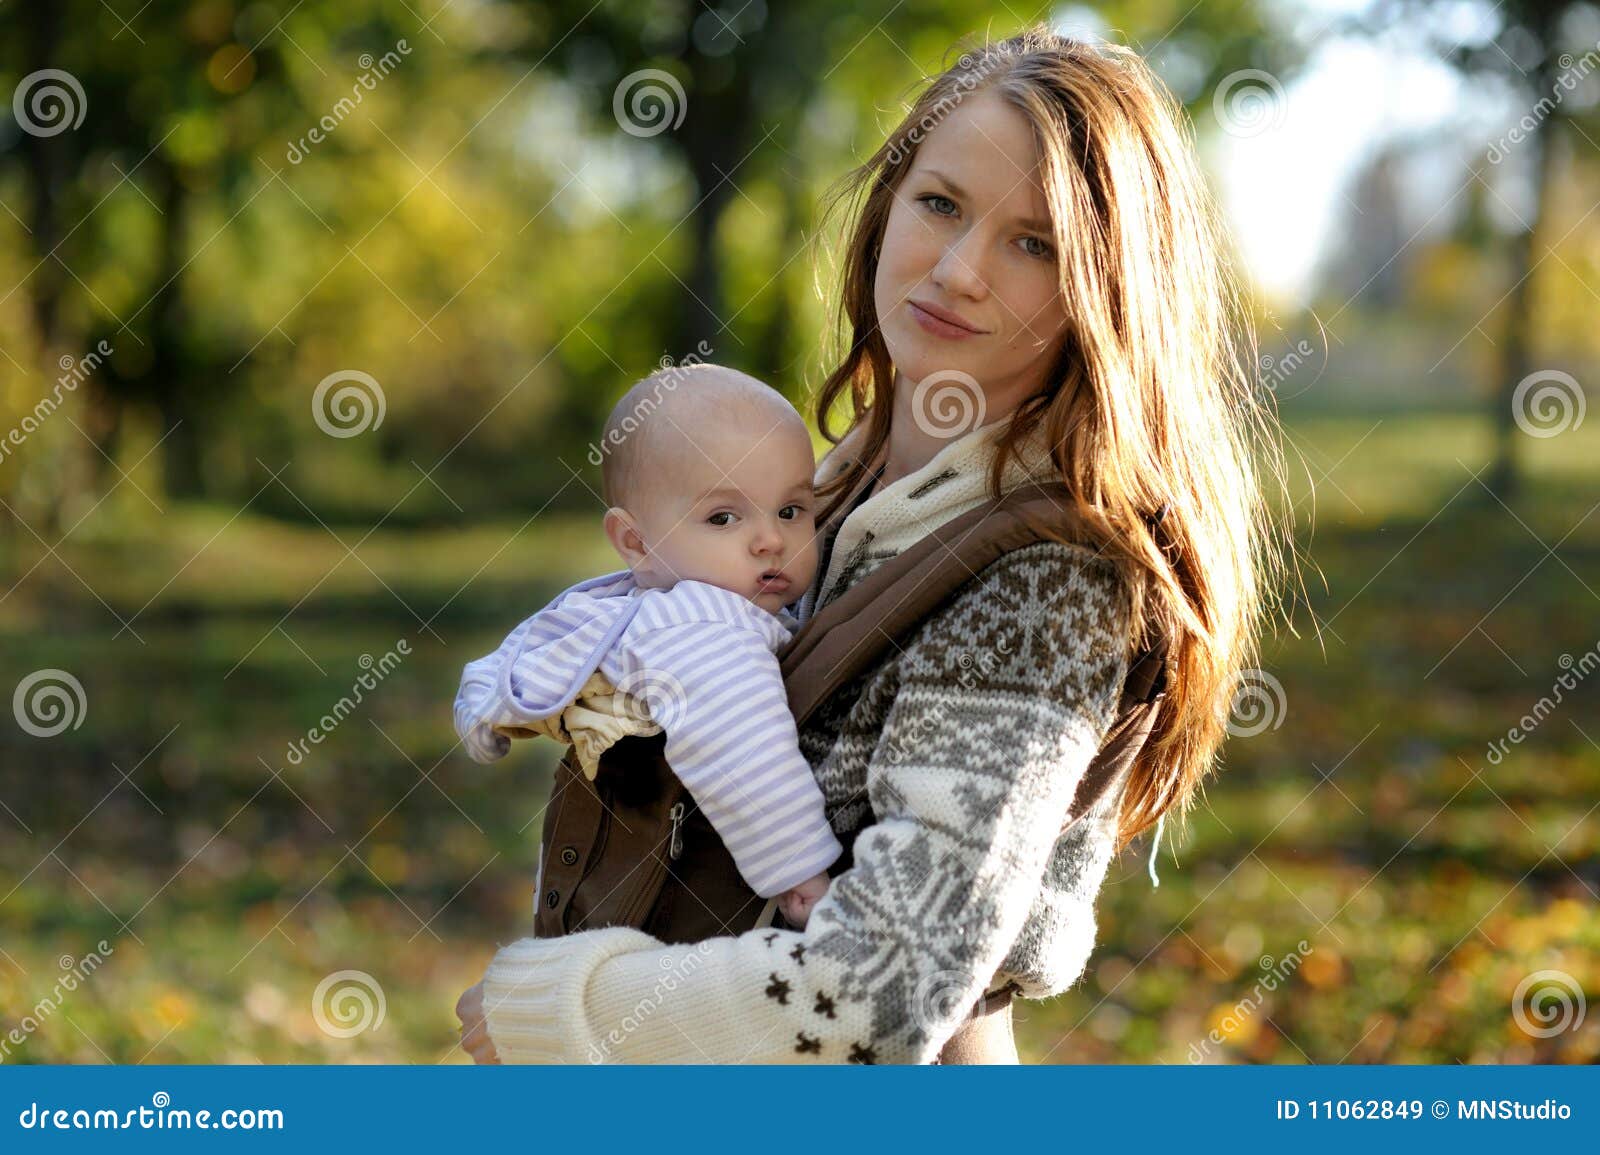 young mother with her baby in a carrier